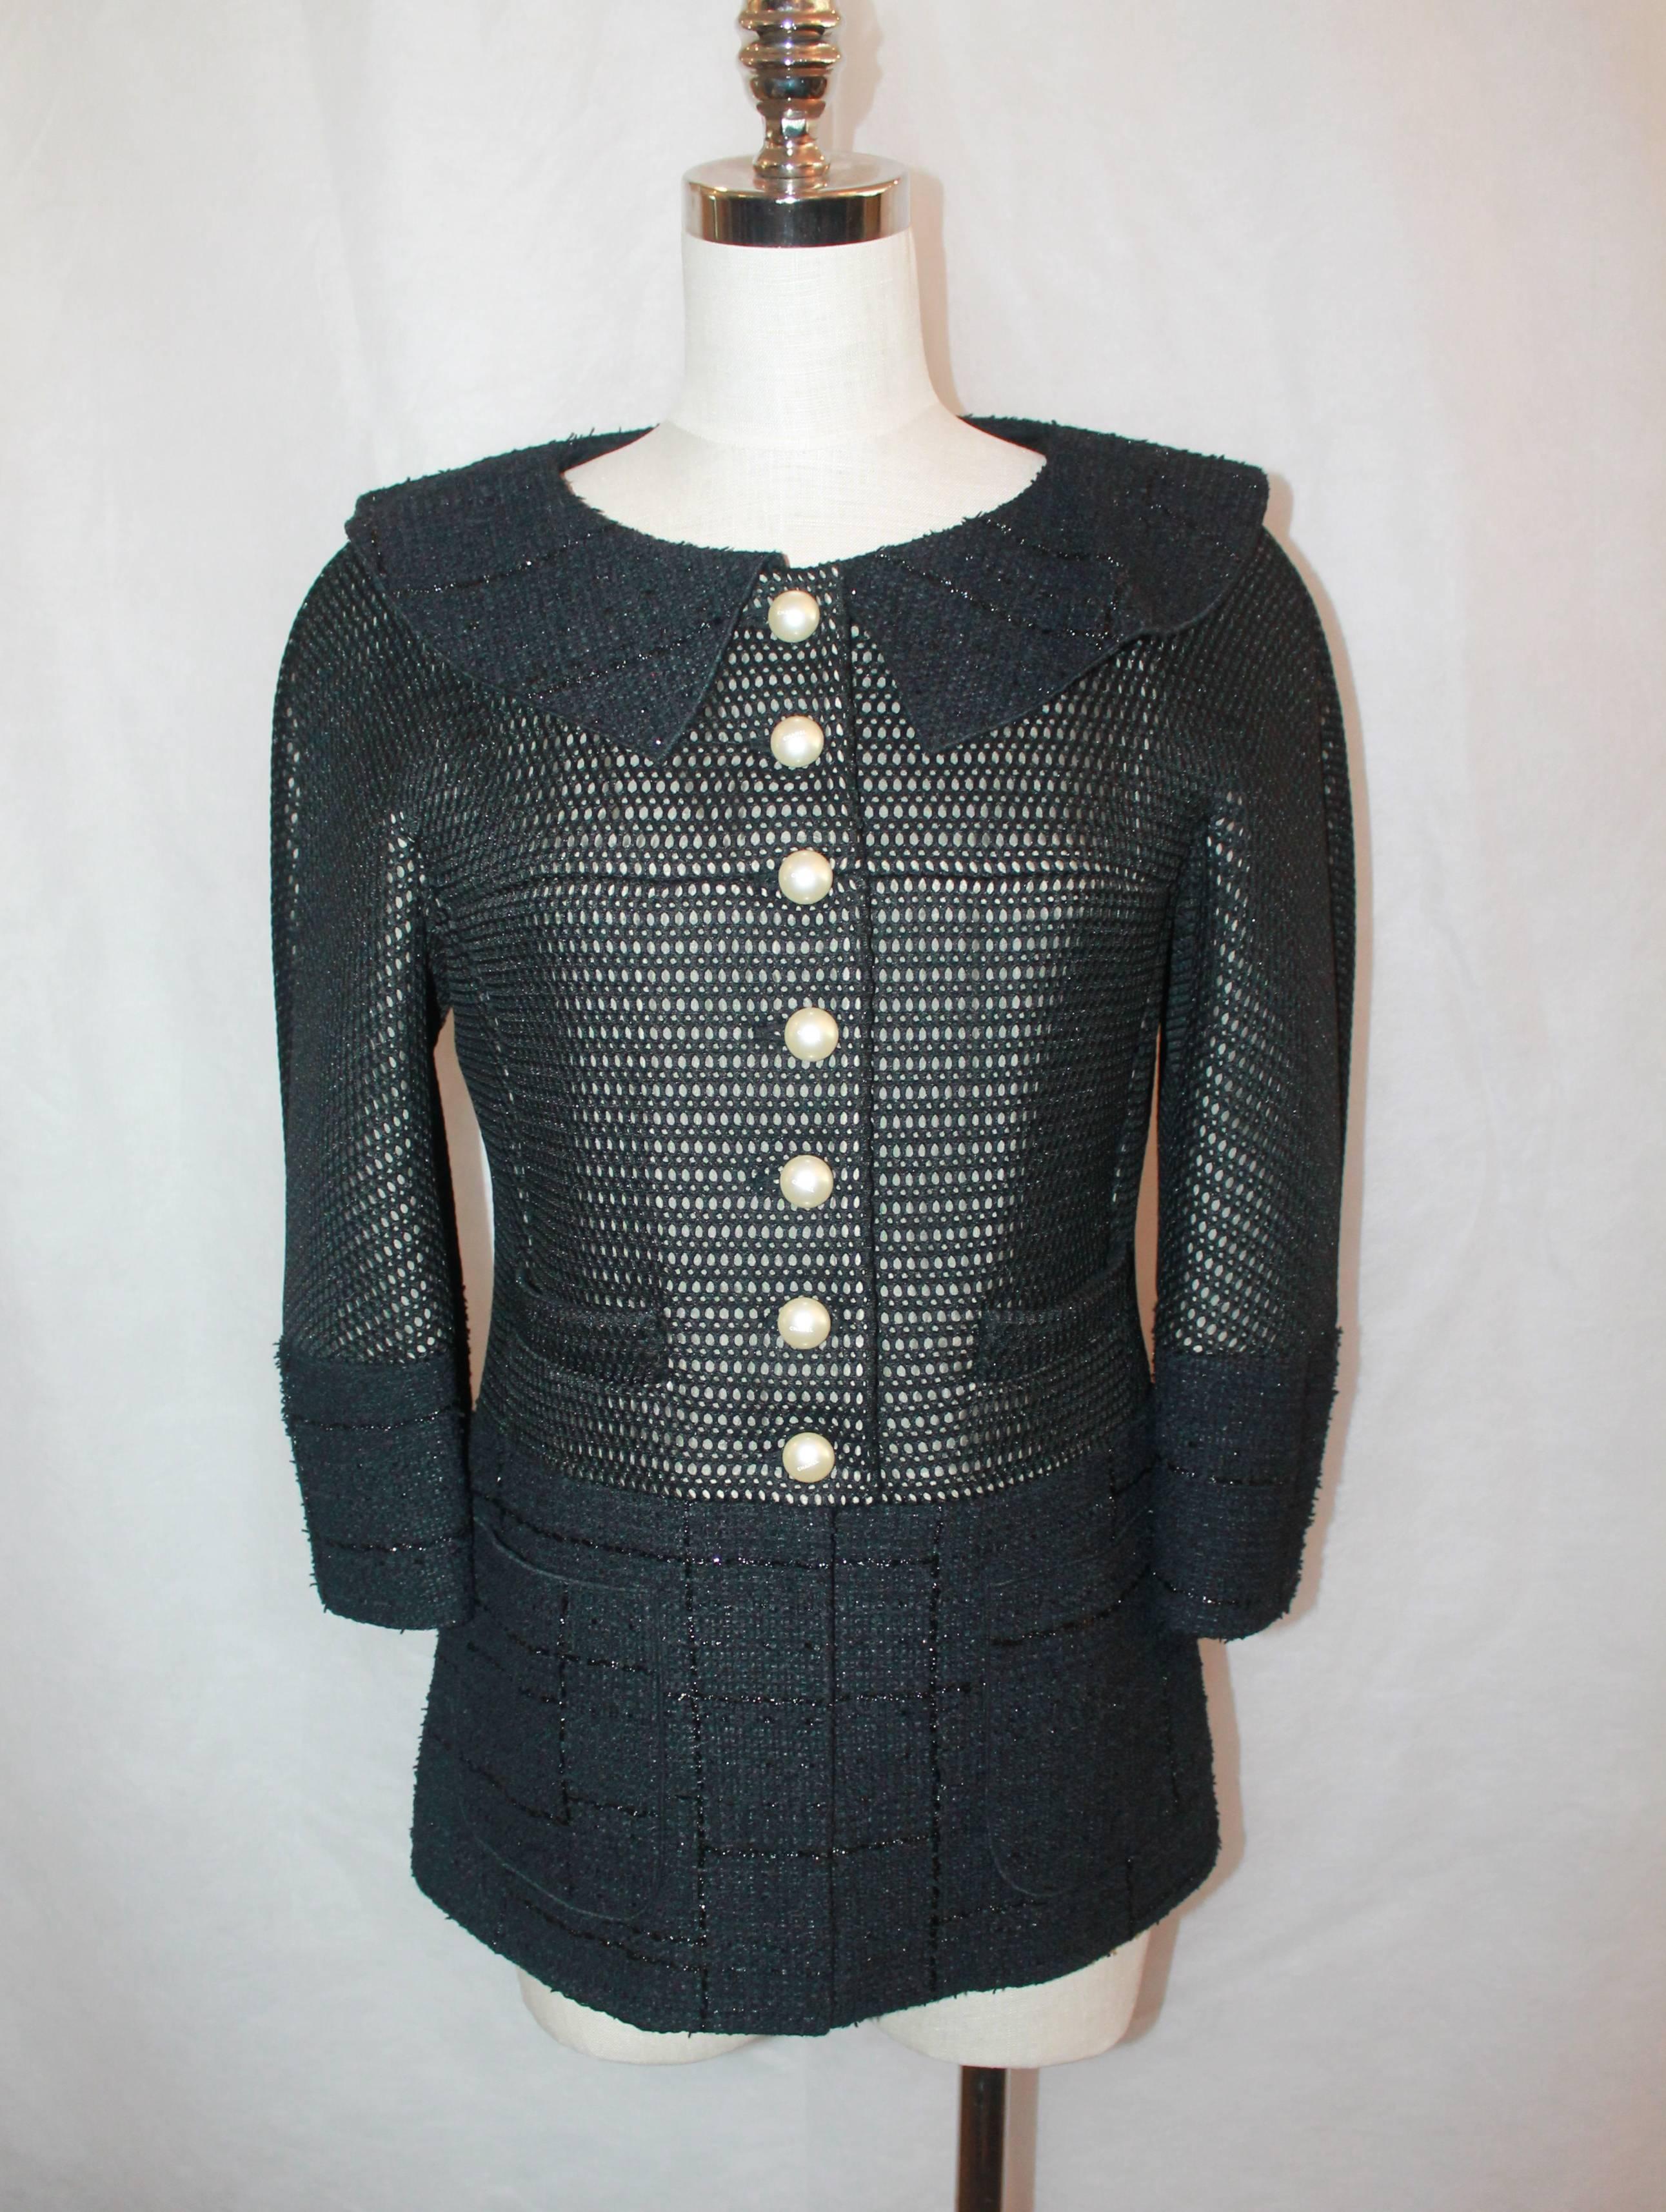 Chanel Black Eyelet and Tweed Jacket - 42

This Chanel Jacket is in excellent condition. It is eyelet with a tweed collar, cuffs, and bottom. The buttons are pearl and have 